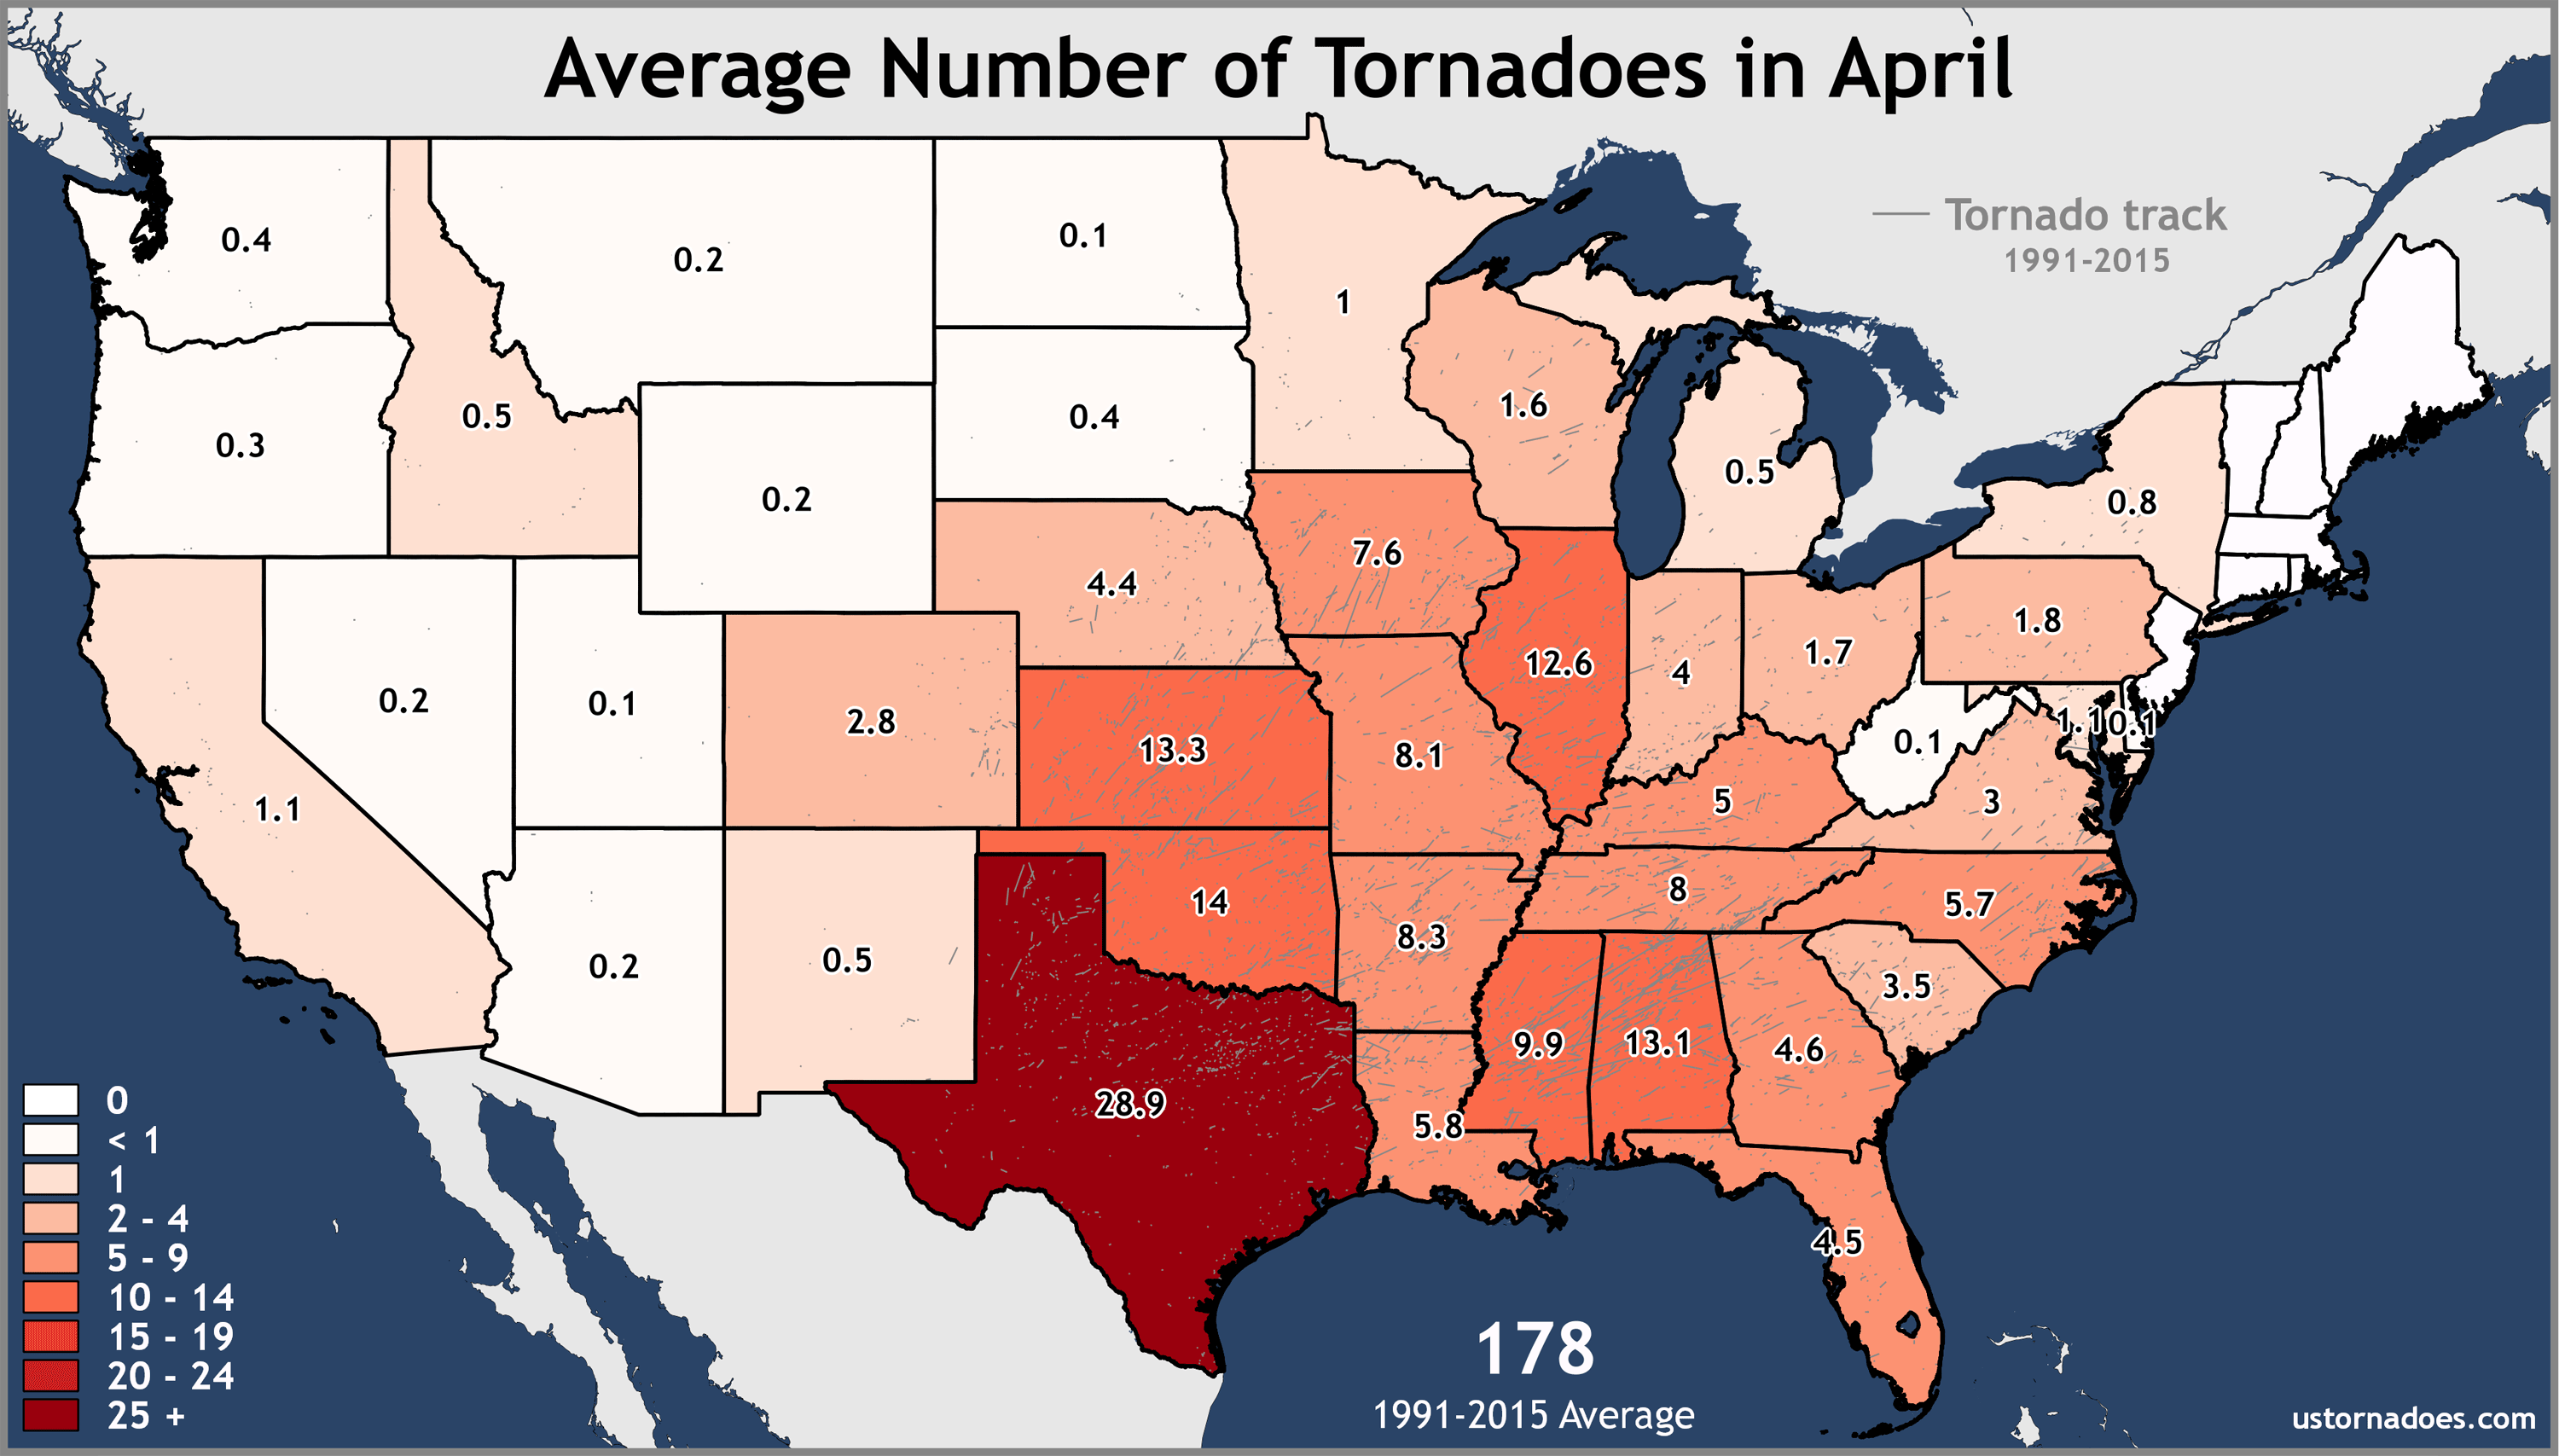 2017 tornadoes by state